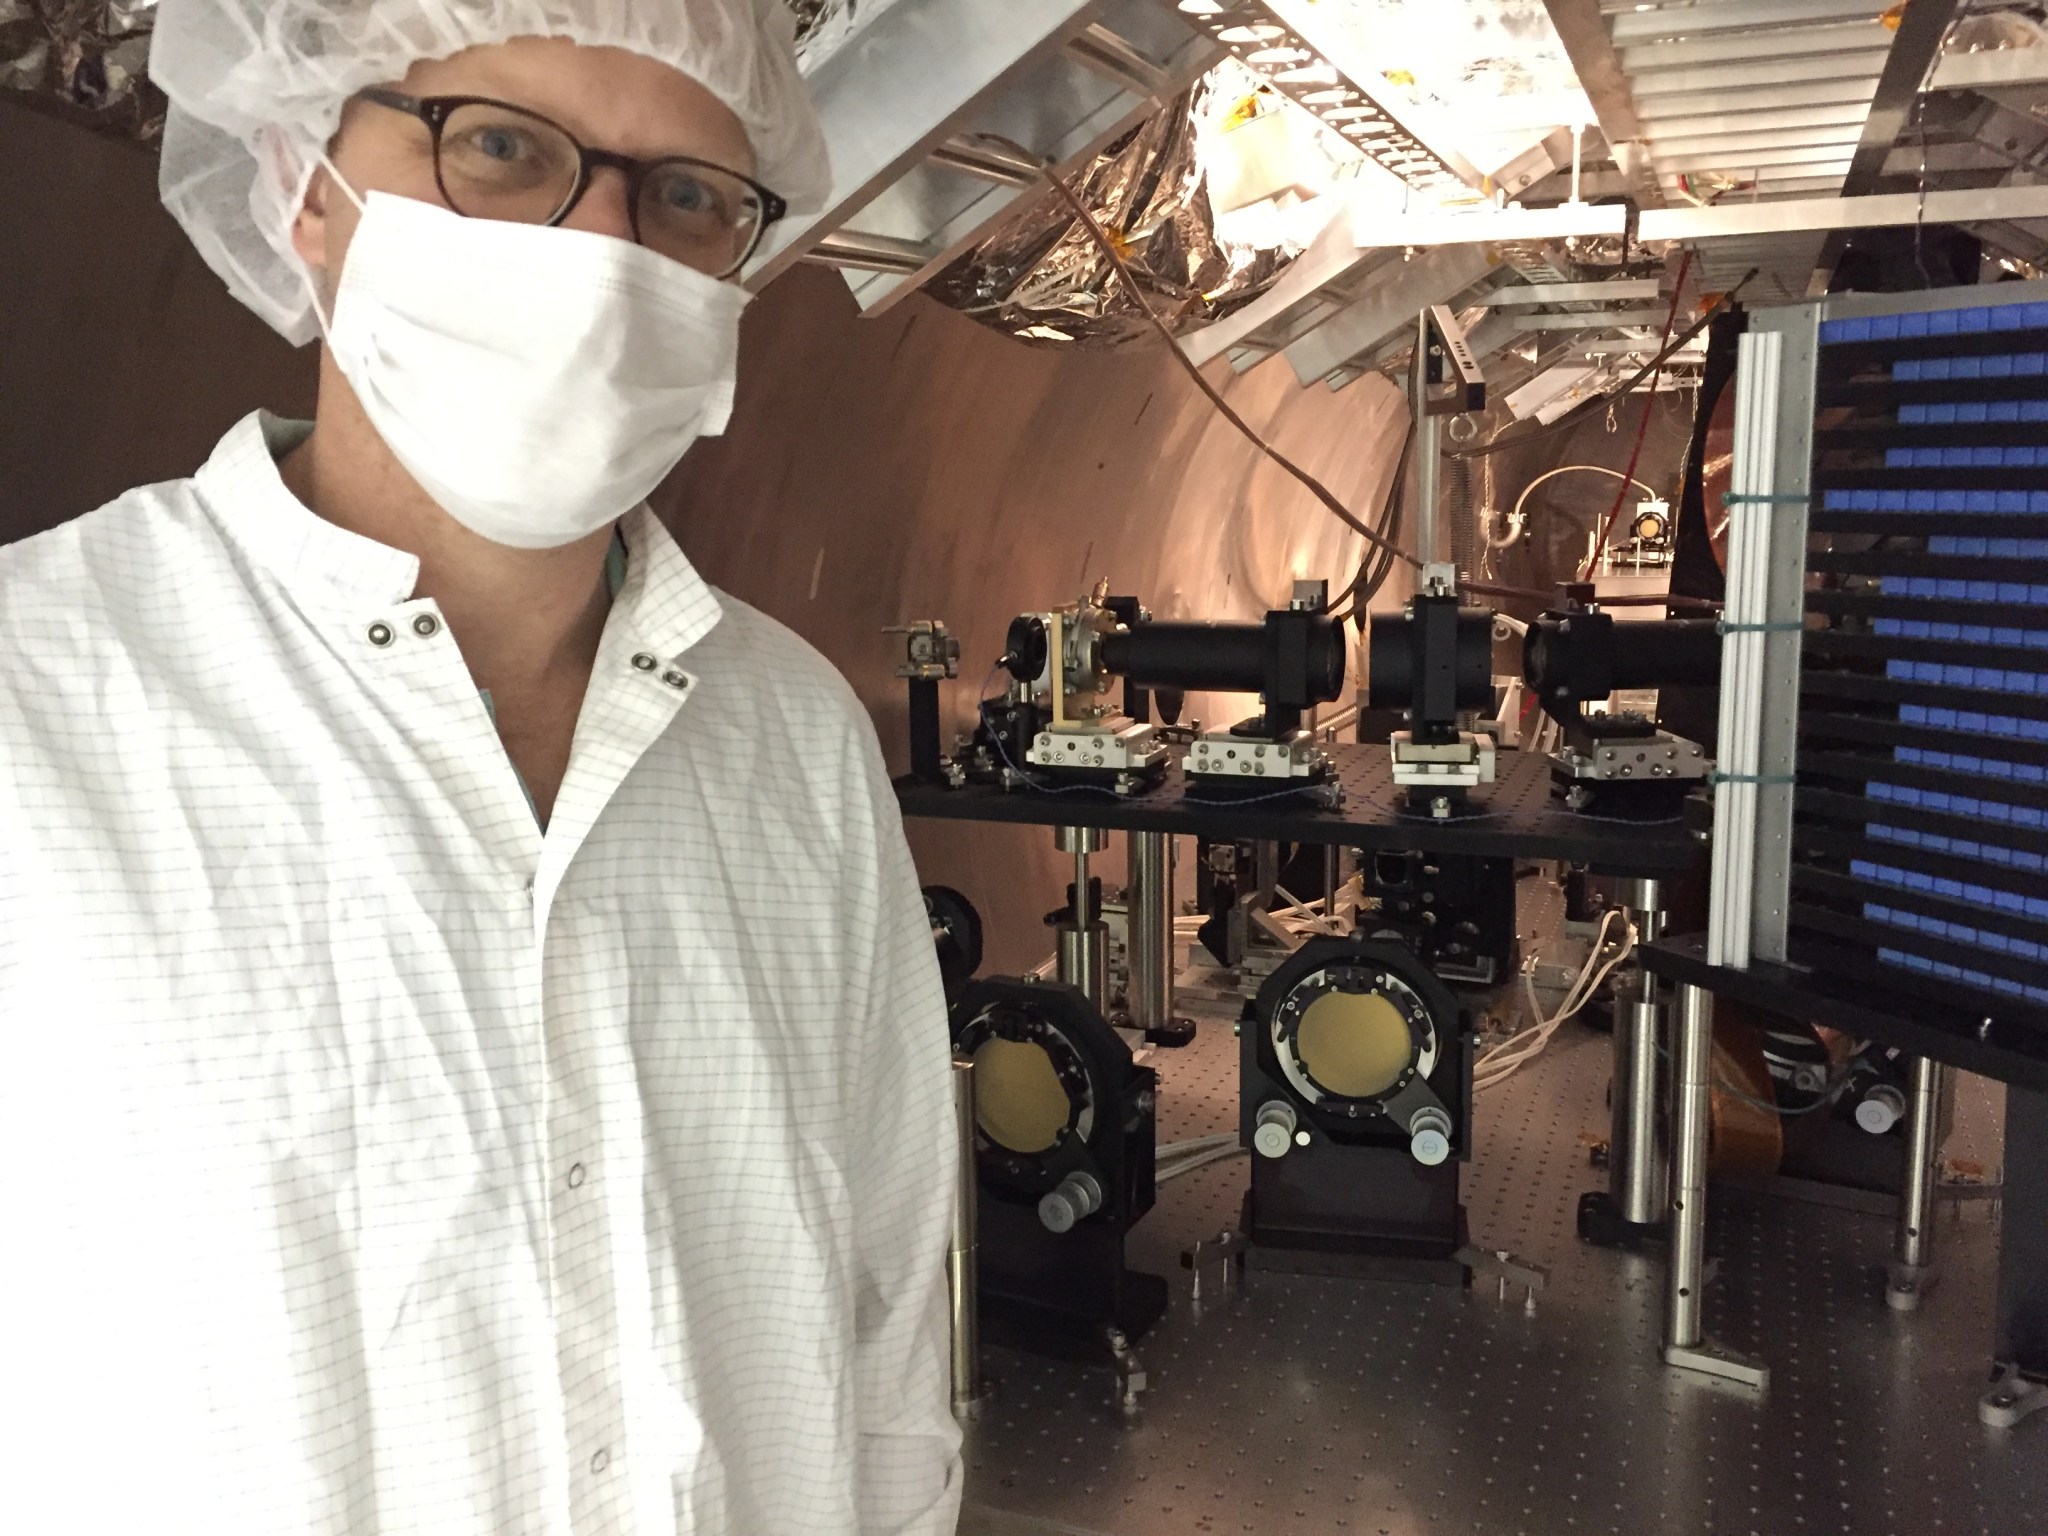 Instrument Scientist Michael McElwain wears a lab coat, mask and hair net, standing in the High-Contrast Imaging Testbed at NASA’s Jet Propulsion Laboratory 